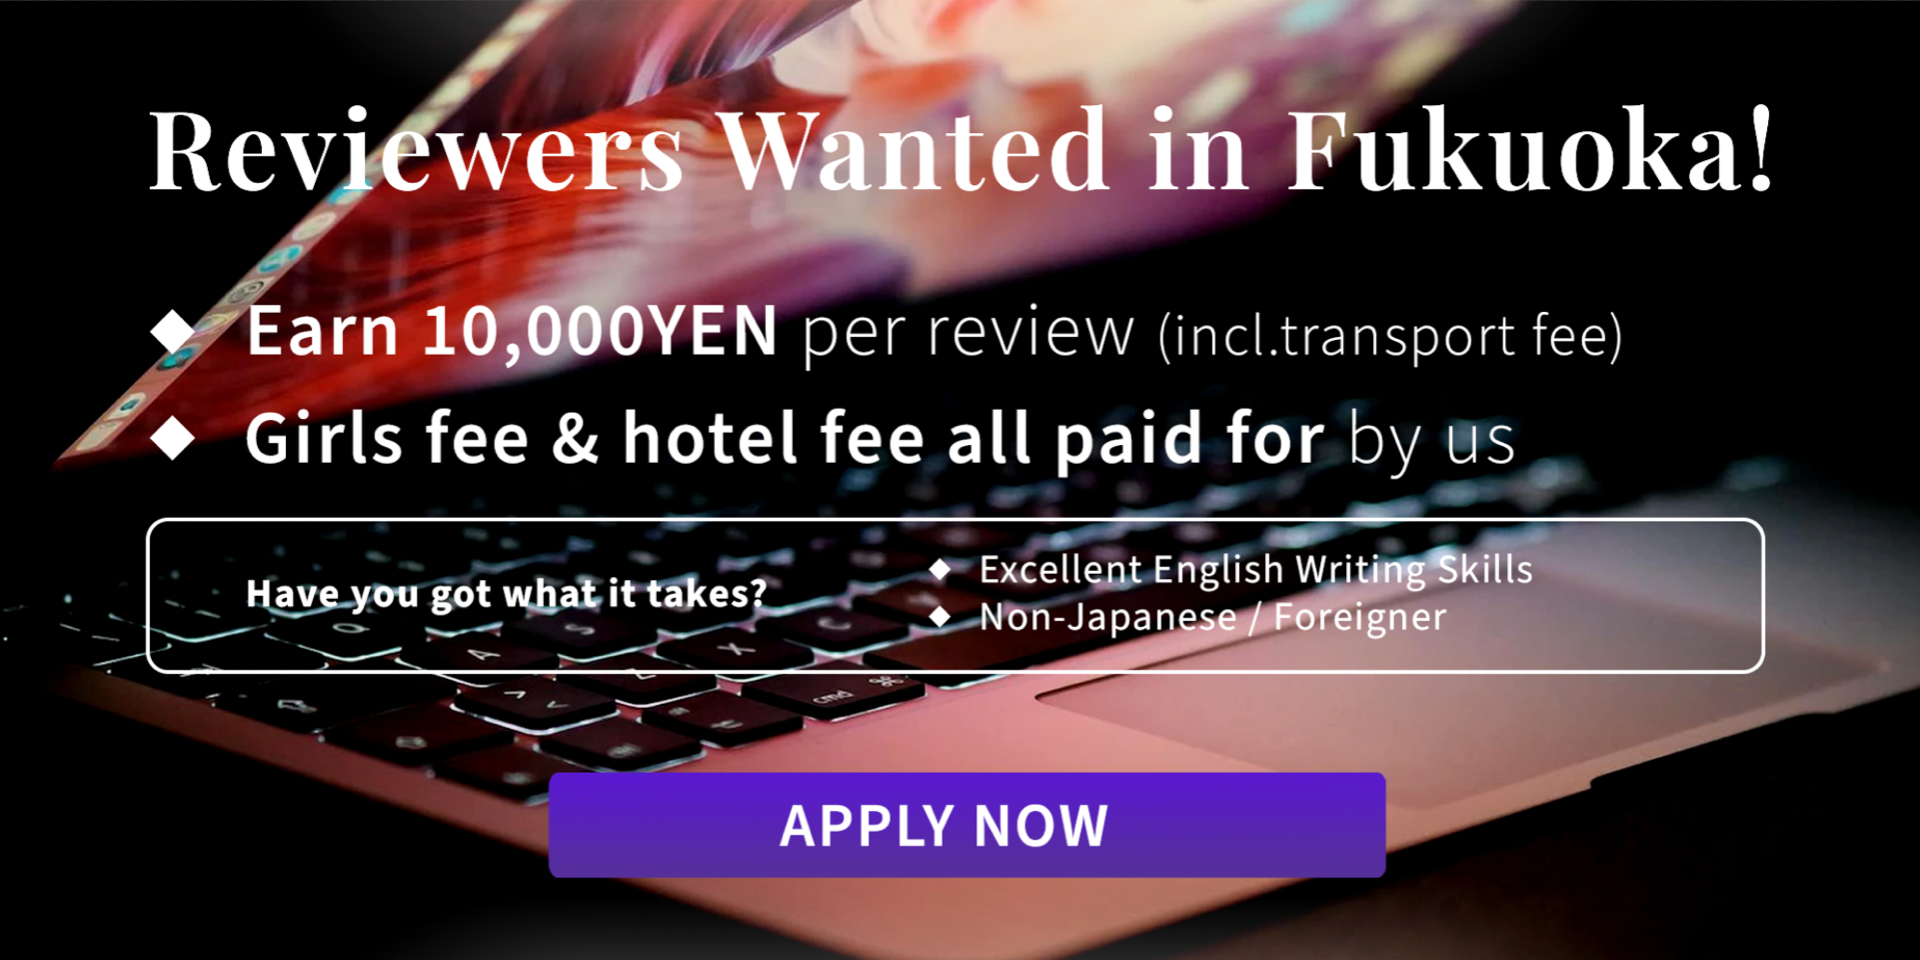 Reviewers Wanted in Fukuoka!